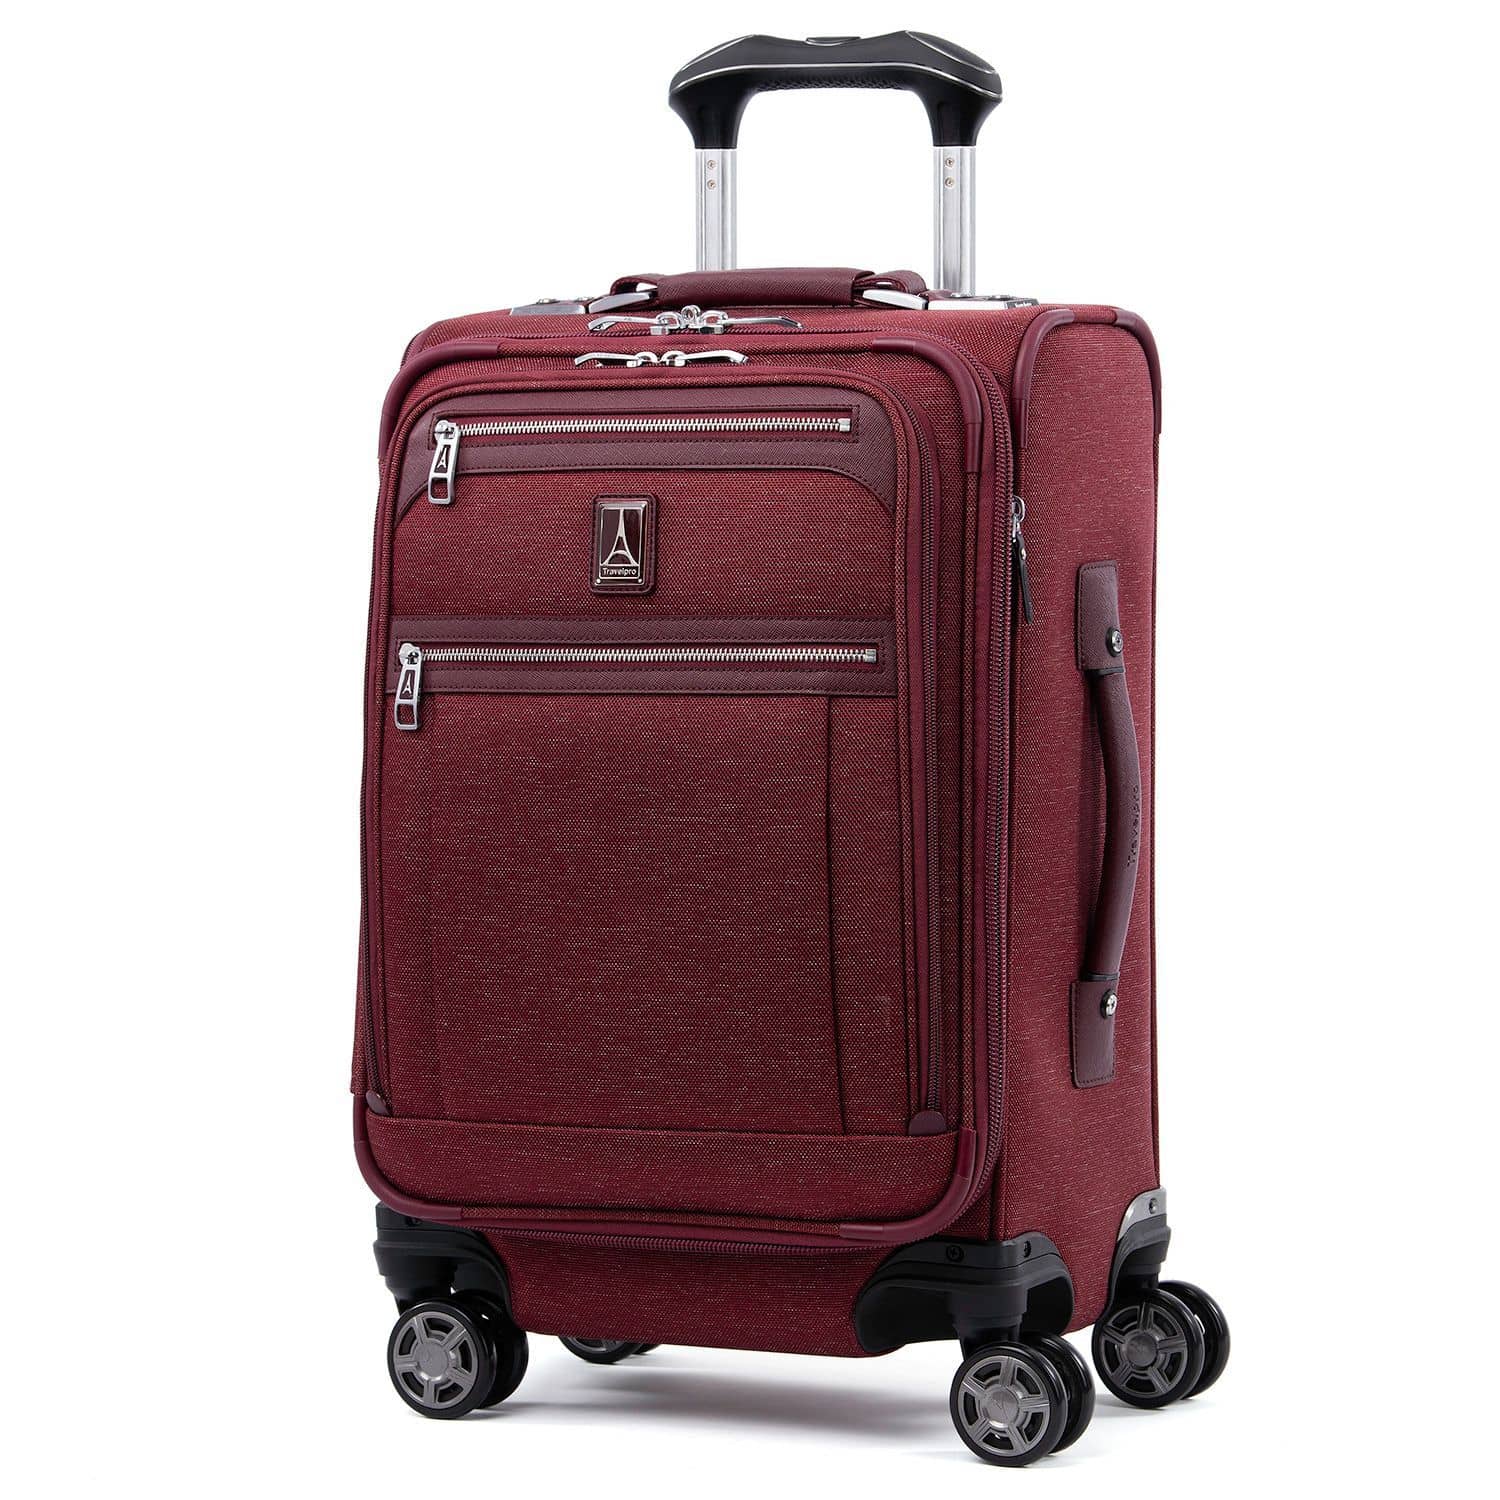 Travelpro Platinum Elite Carry-On Business Plus Spinner Luggage in Bordeaux Red | Travel Suitcase